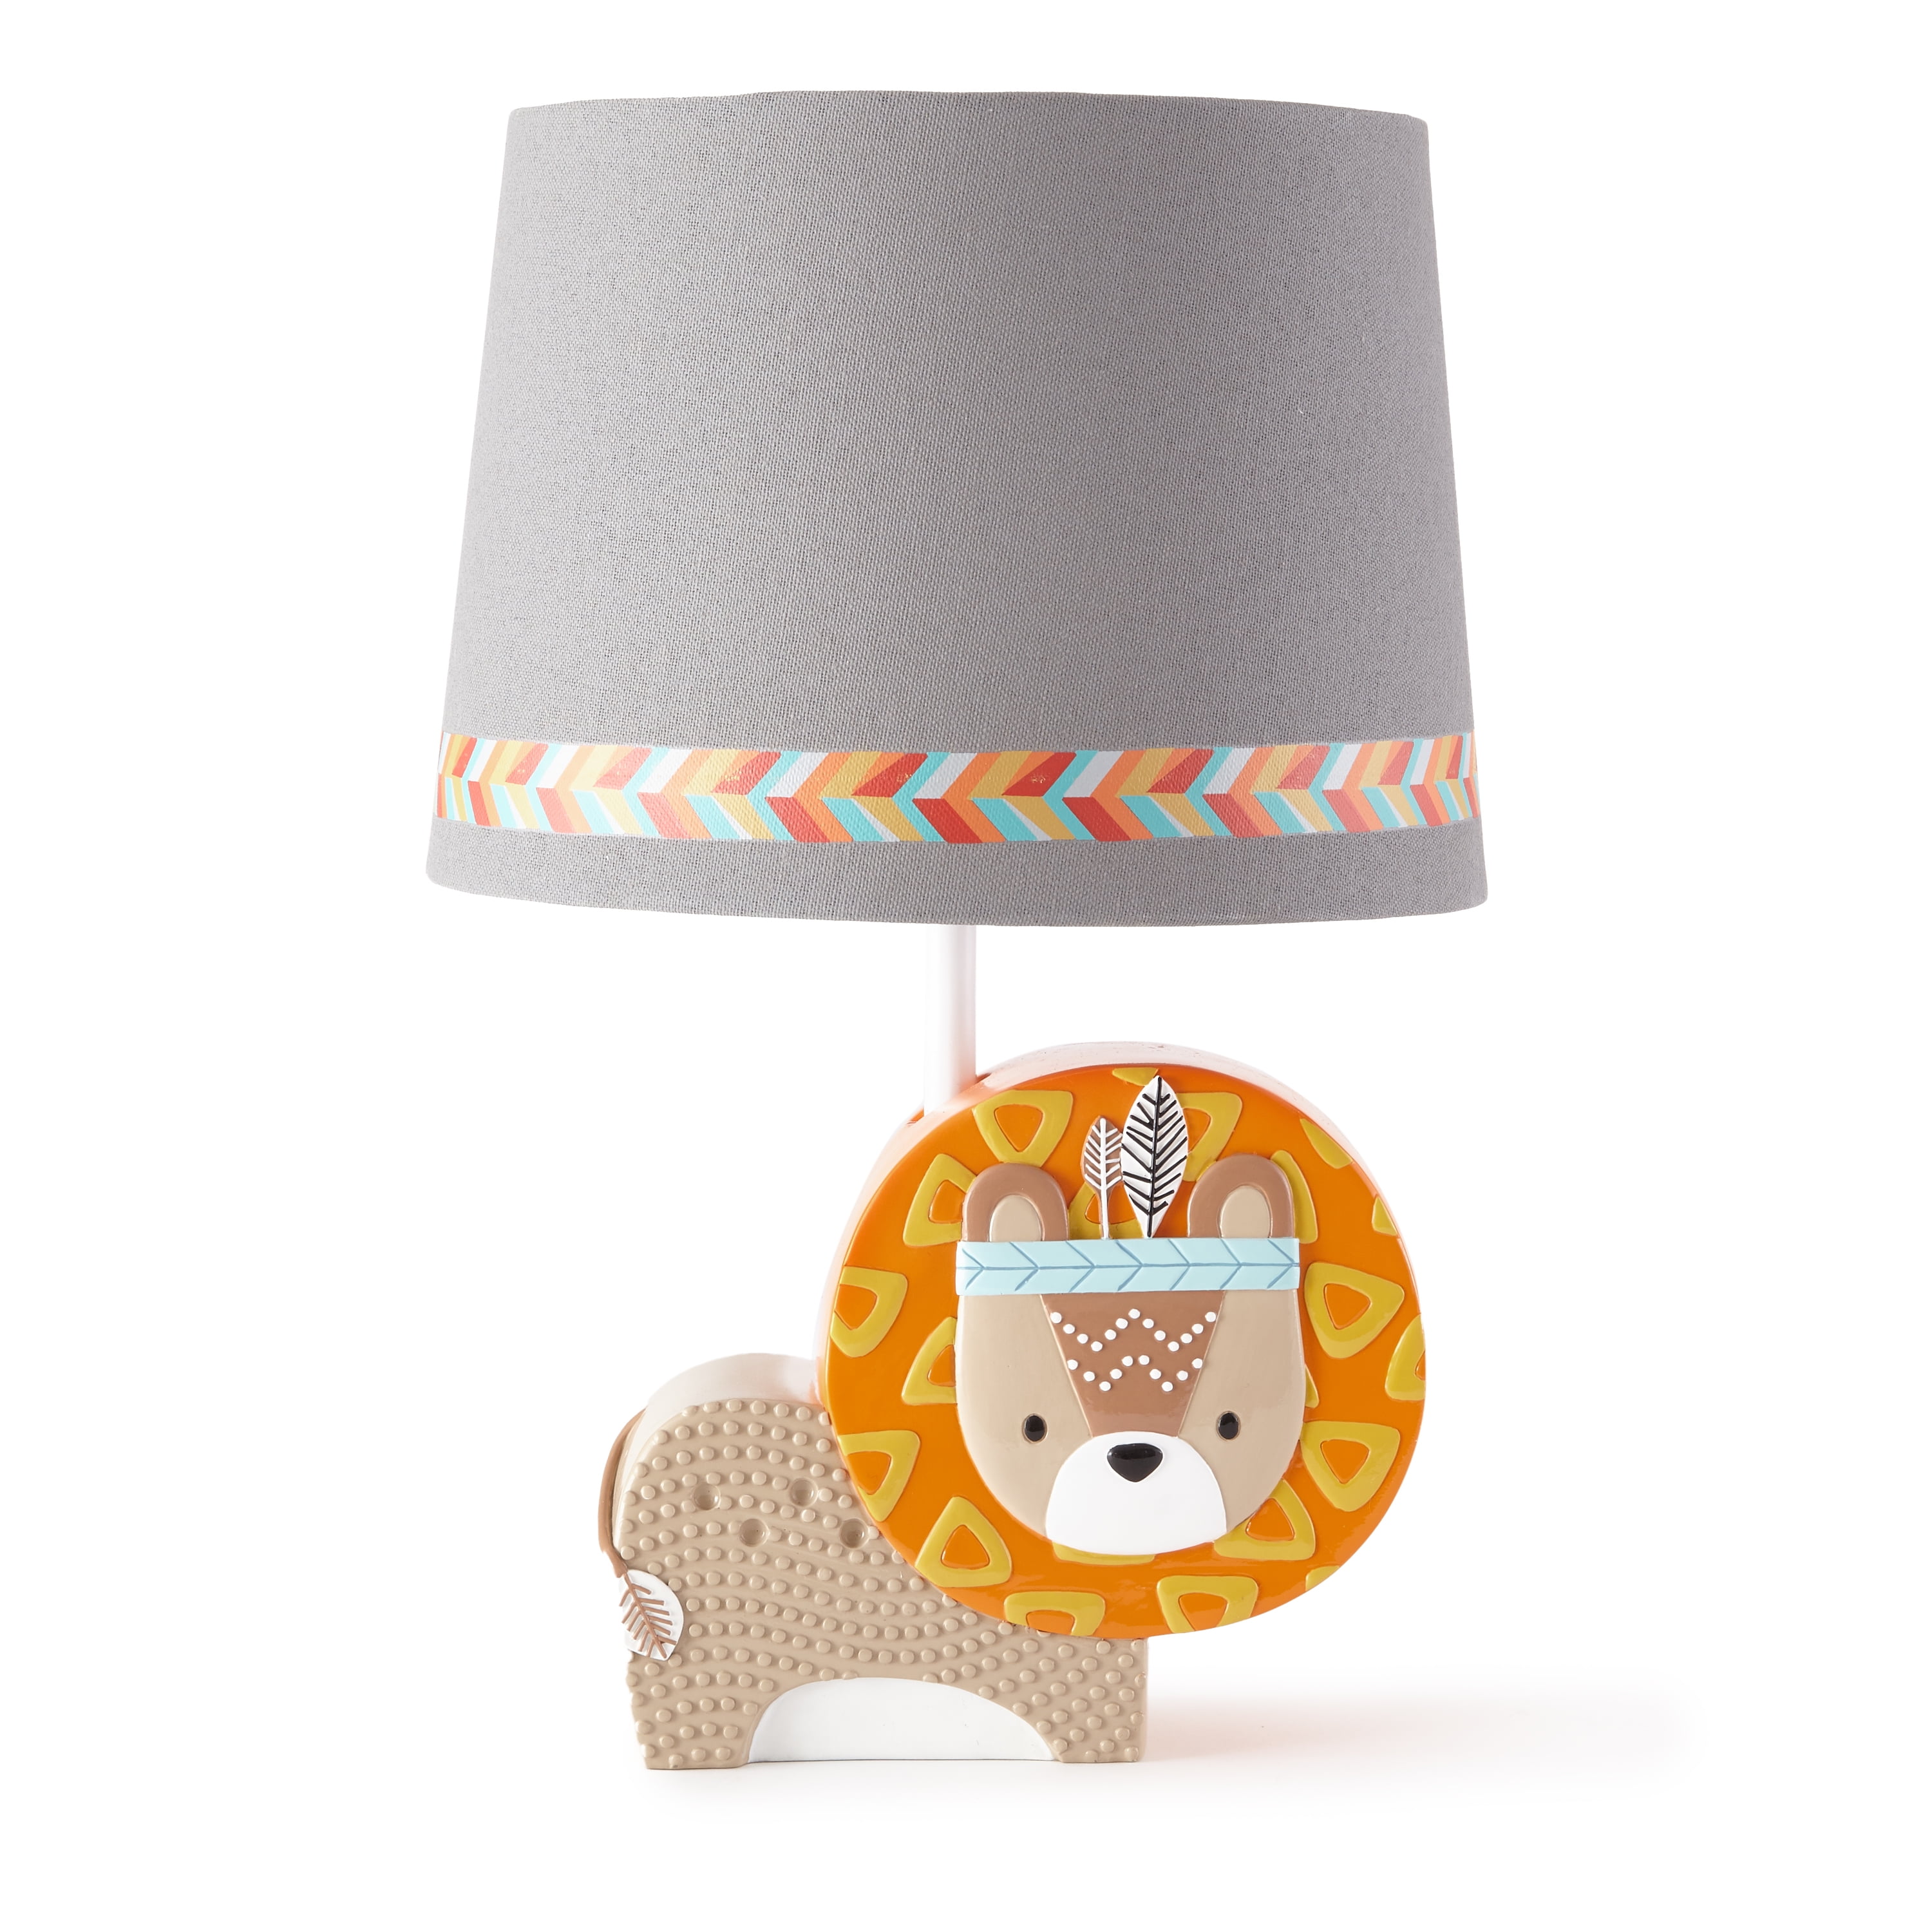 Lion Table Lamp shades Ceiling Lights Bedside Lampshade Ceiling Pendant Lighting 